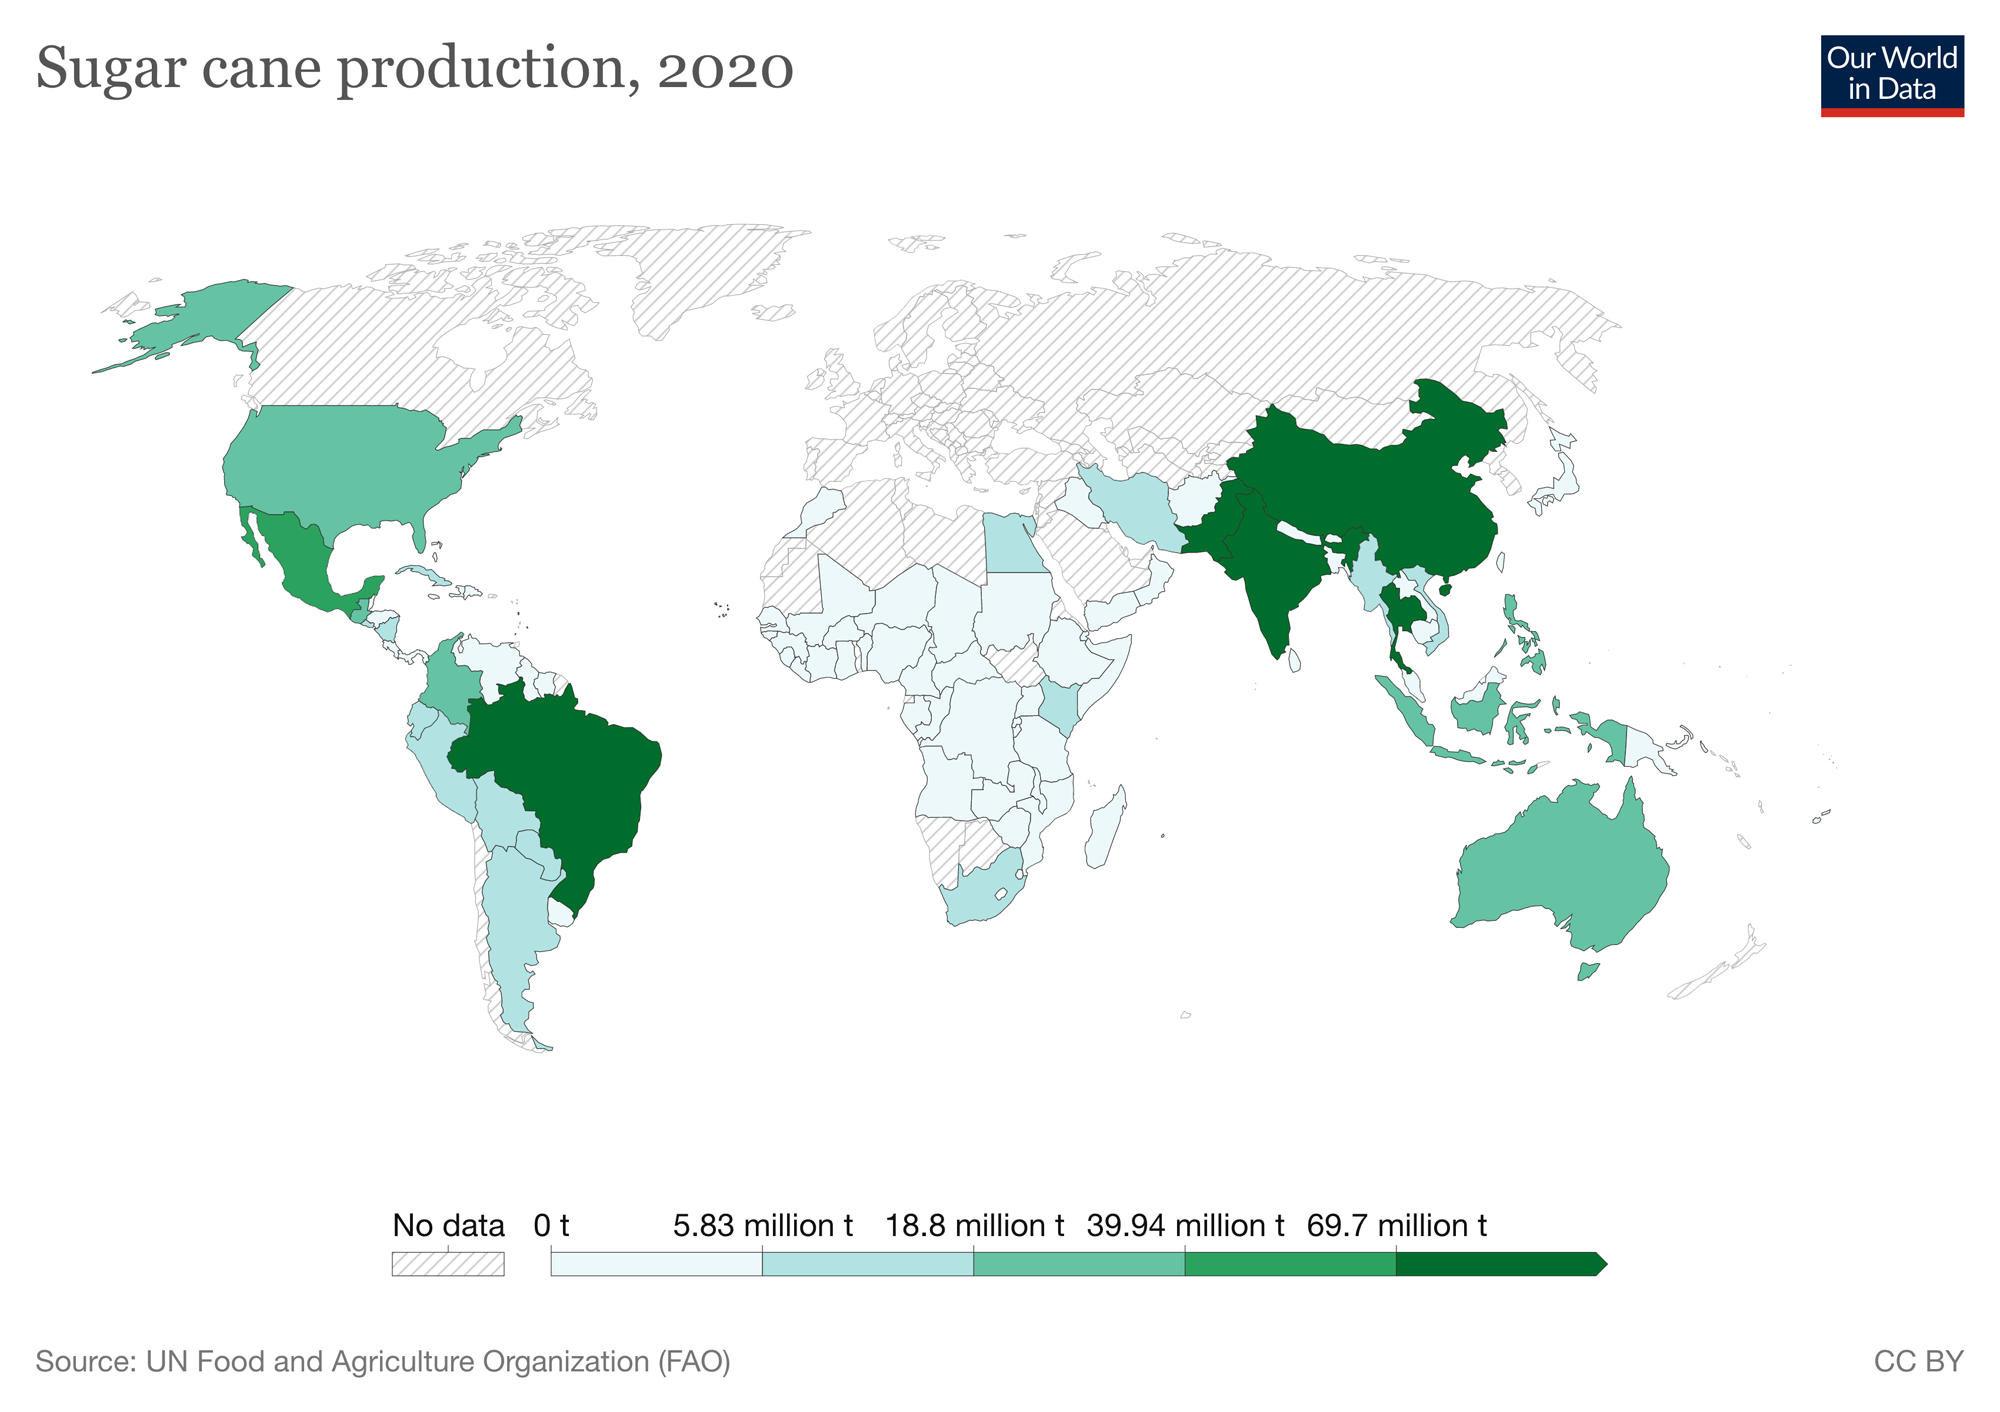 World map shaded in various intensities of green by country to indicate the amount of sugarcane produced in 2020. The darkest countries on the map are Brazil, India, Pakistan, China, and Thailand, which each produced at least 69.7 million tons of sugarcane.